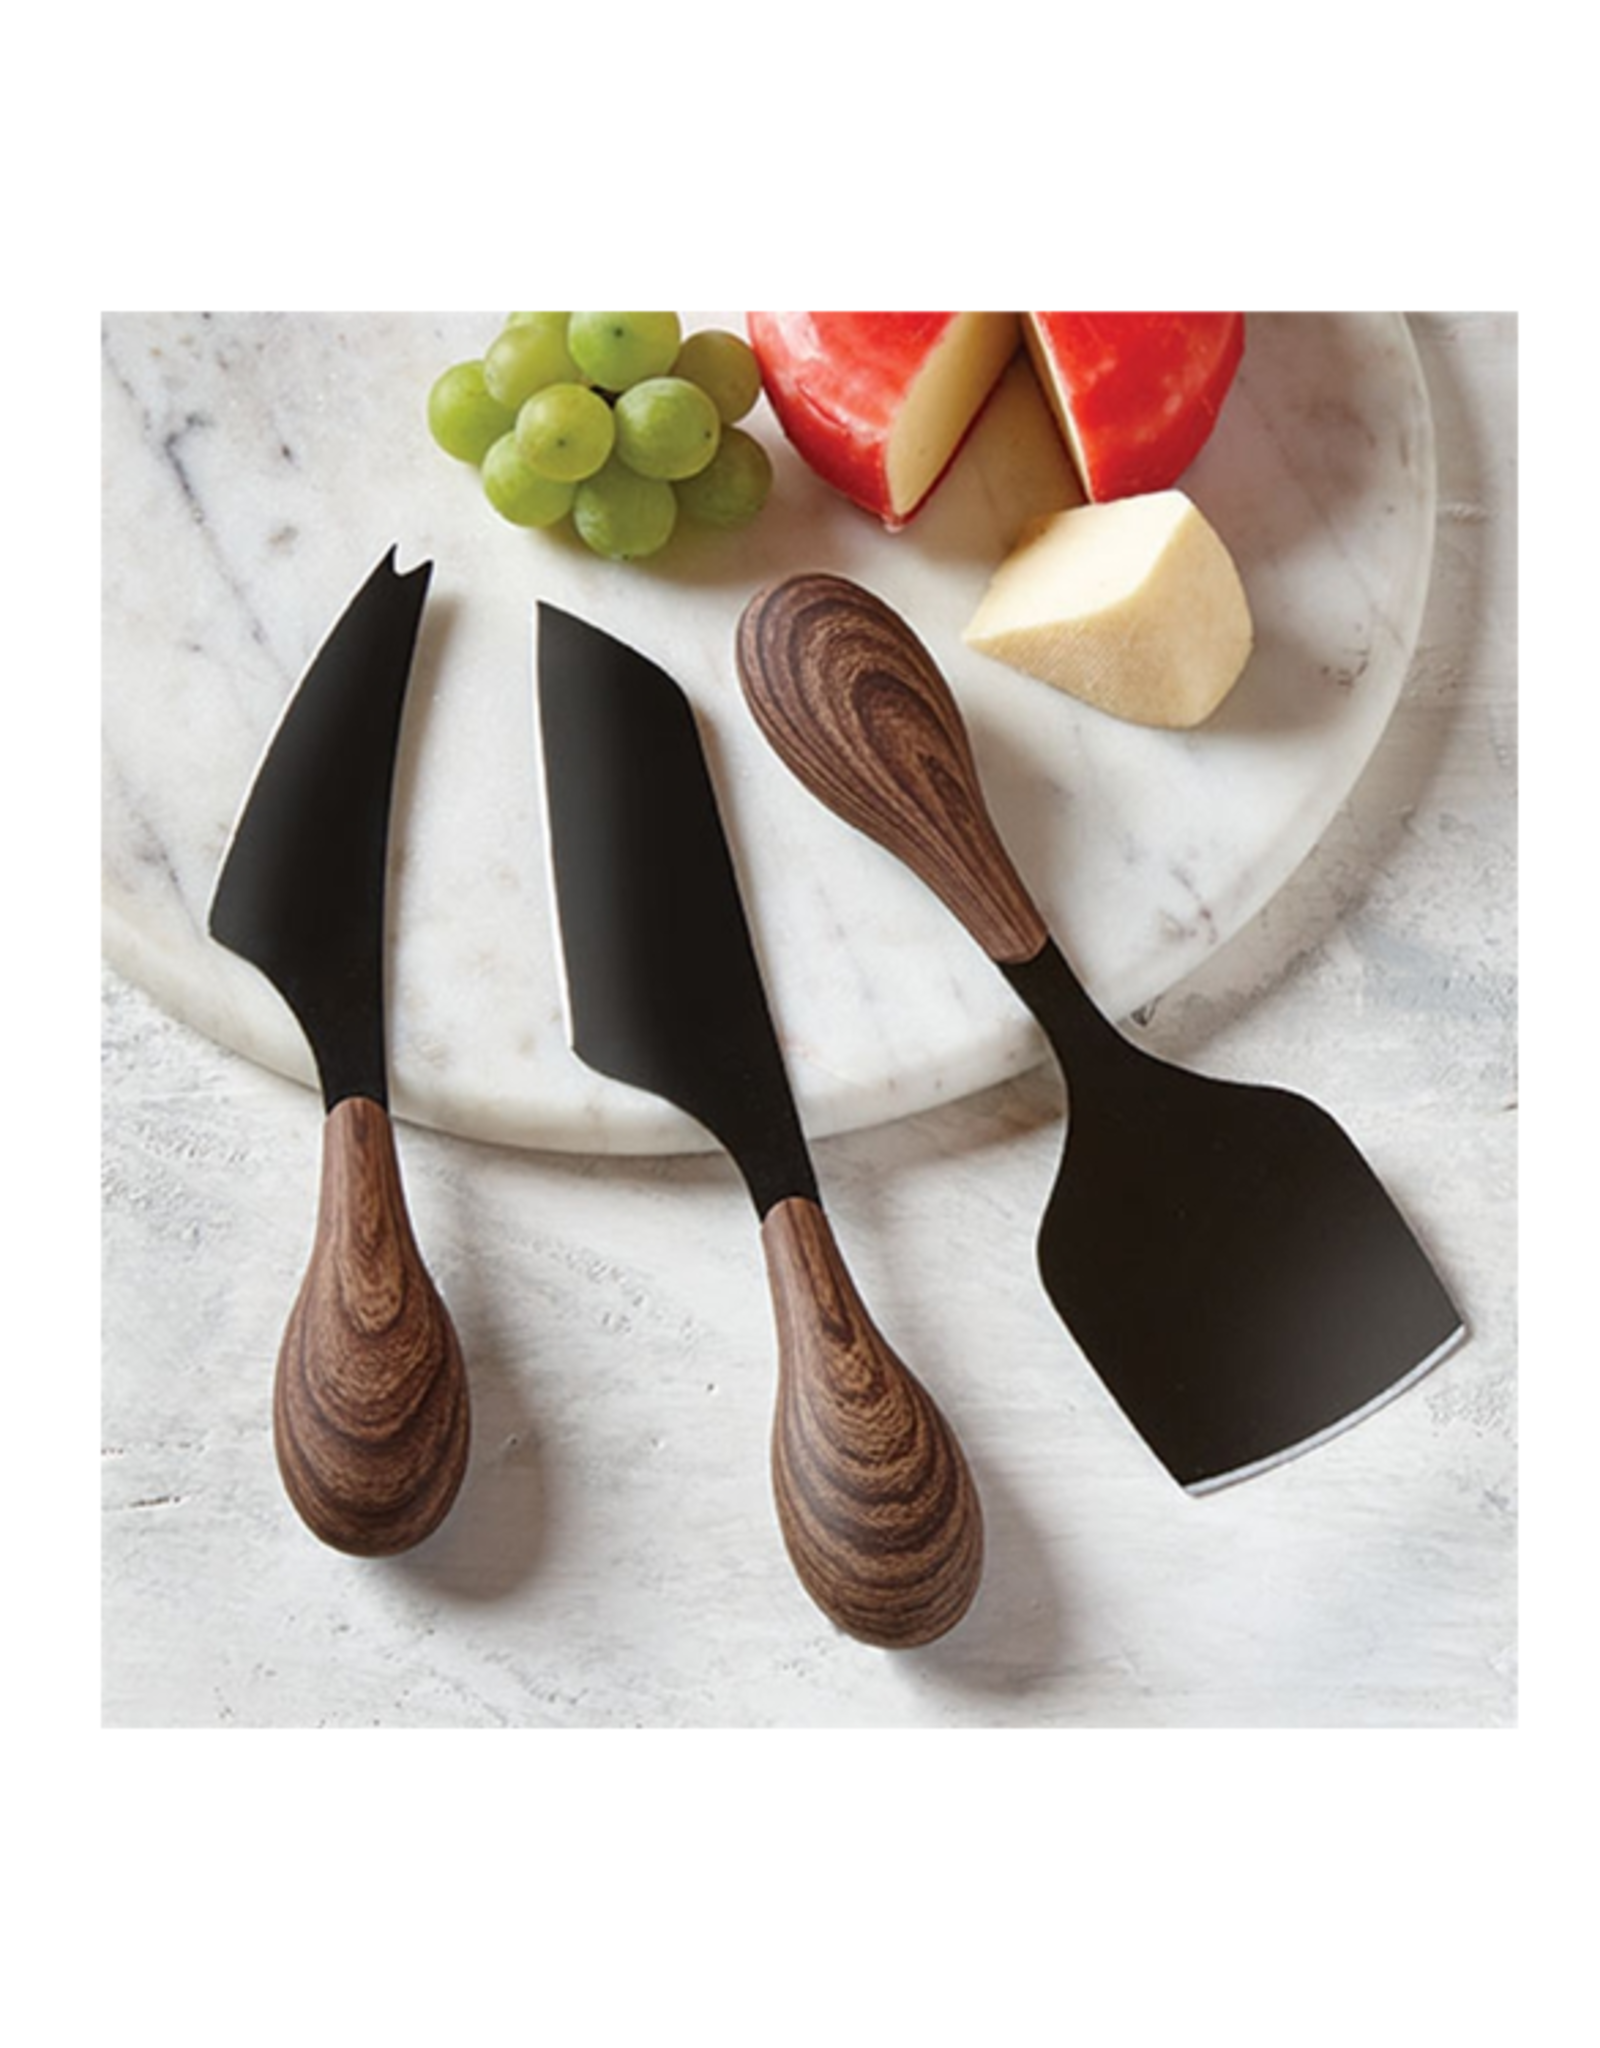 Tag Cheese Utensil S/3 - Wood Handle